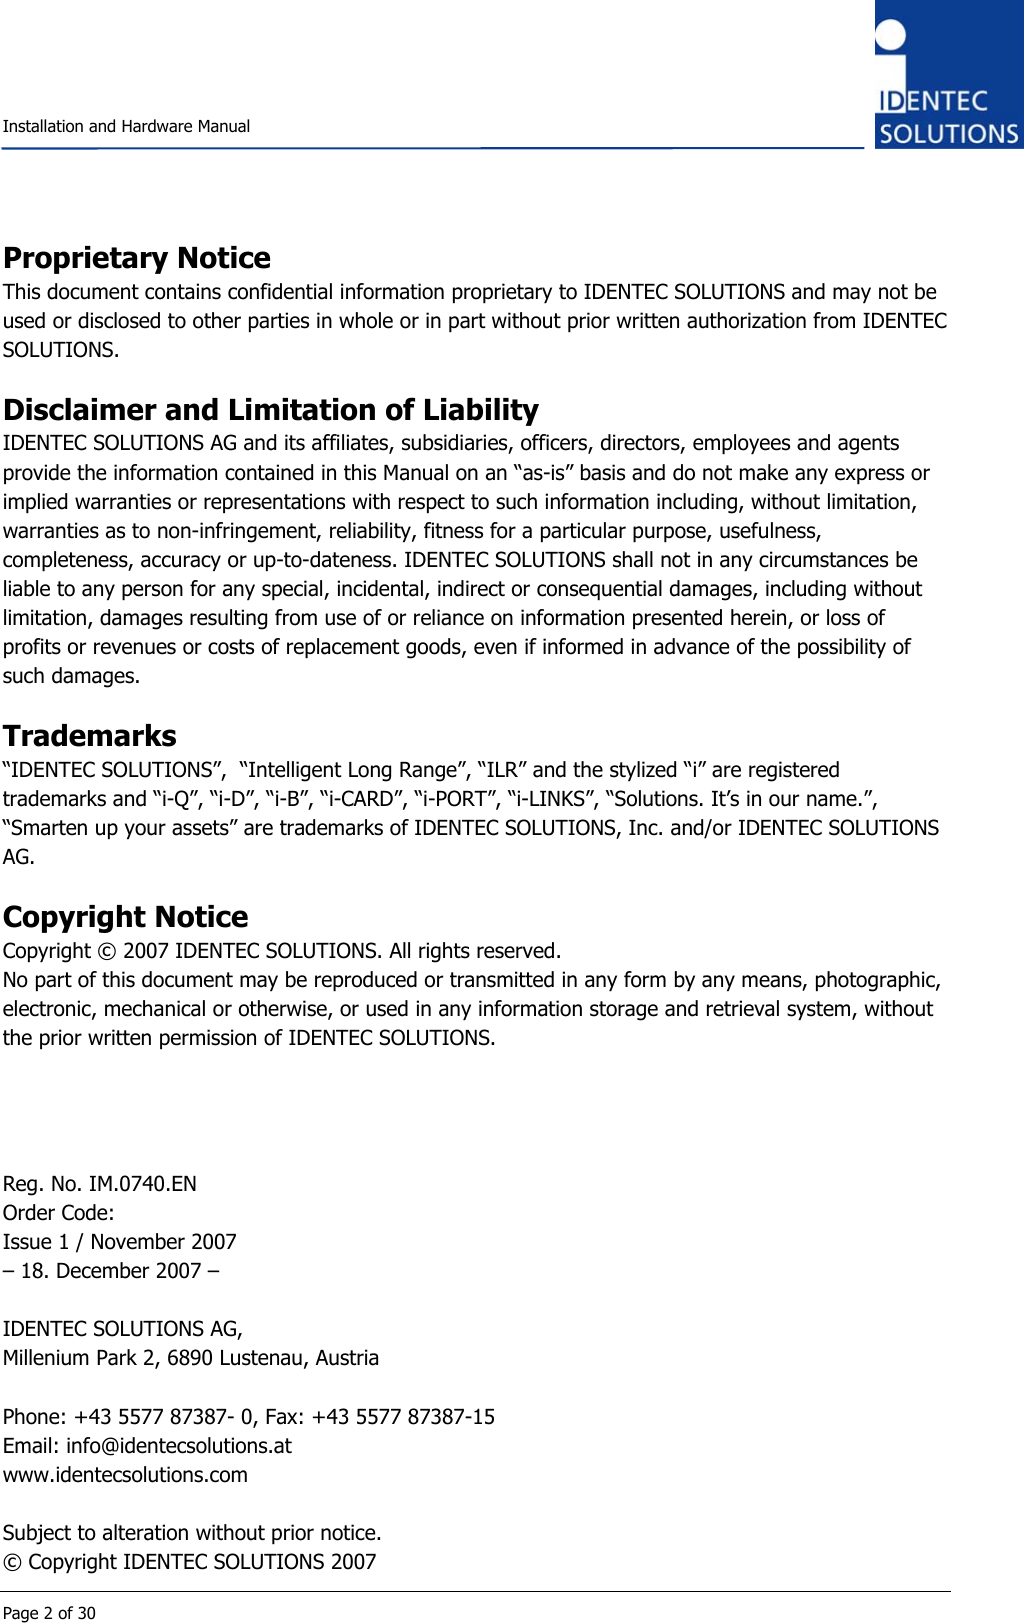    Installation and Hardware Manual  Page 2 of 30 Proprietary Notice This document contains confidential information proprietary to IDENTEC SOLUTIONS and may not be used or disclosed to other parties in whole or in part without prior written authorization from IDENTEC SOLUTIONS.  Disclaimer and Limitation of Liability IDENTEC SOLUTIONS AG and its affiliates, subsidiaries, officers, directors, employees and agents provide the information contained in this Manual on an “as-is” basis and do not make any express or implied warranties or representations with respect to such information including, without limitation, warranties as to non-infringement, reliability, fitness for a particular purpose, usefulness, completeness, accuracy or up-to-dateness. IDENTEC SOLUTIONS shall not in any circumstances be liable to any person for any special, incidental, indirect or consequential damages, including without limitation, damages resulting from use of or reliance on information presented herein, or loss of profits or revenues or costs of replacement goods, even if informed in advance of the possibility of such damages.  Trademarks “IDENTEC SOLUTIONS”,  “Intelligent Long Range”, “ILR” and the stylized “i” are registered trademarks and “i-Q”, “i-D”, “i-B”, “i-CARD”, “i-PORT”, “i-LINKS”, “Solutions. It’s in our name.”, “Smarten up your assets” are trademarks of IDENTEC SOLUTIONS, Inc. and/or IDENTEC SOLUTIONS AG.  Copyright Notice Copyright © 2007 IDENTEC SOLUTIONS. All rights reserved. No part of this document may be reproduced or transmitted in any form by any means, photographic, electronic, mechanical or otherwise, or used in any information storage and retrieval system, without the prior written permission of IDENTEC SOLUTIONS.     Reg. No. IM.0740.EN Order Code: Issue 1 / November 2007 – 18. December 2007 –  IDENTEC SOLUTIONS AG,  Millenium Park 2, 6890 Lustenau, Austria  Phone: +43 5577 87387- 0, Fax: +43 5577 87387-15 Email: info@identecsolutions.at www.identecsolutions.com  Subject to alteration without prior notice. © Copyright IDENTEC SOLUTIONS 2007 